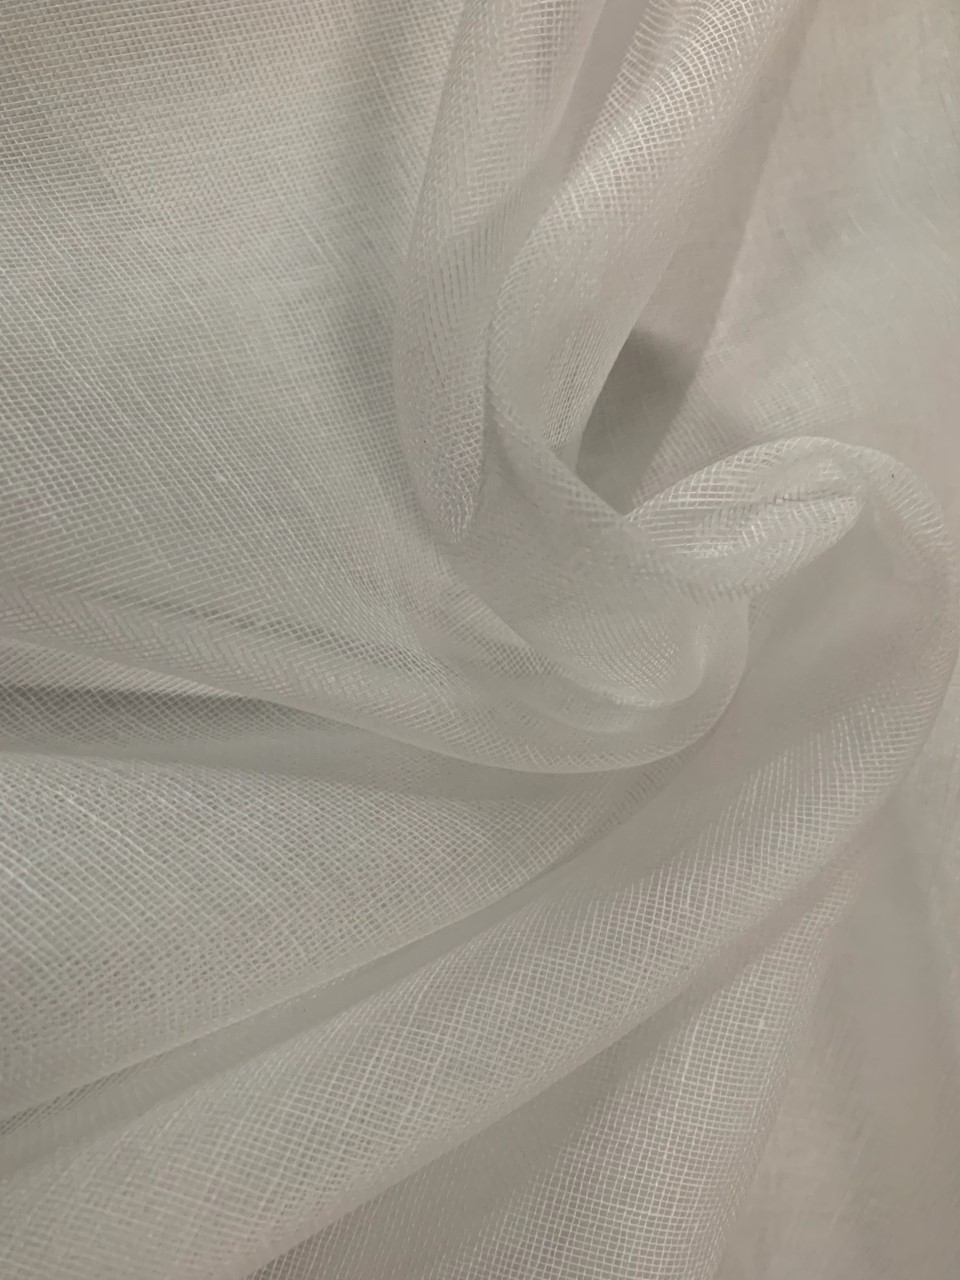 Grade 60 White Cheesecloth Roll - 100 Yards 36" Wide - Click Image to Close